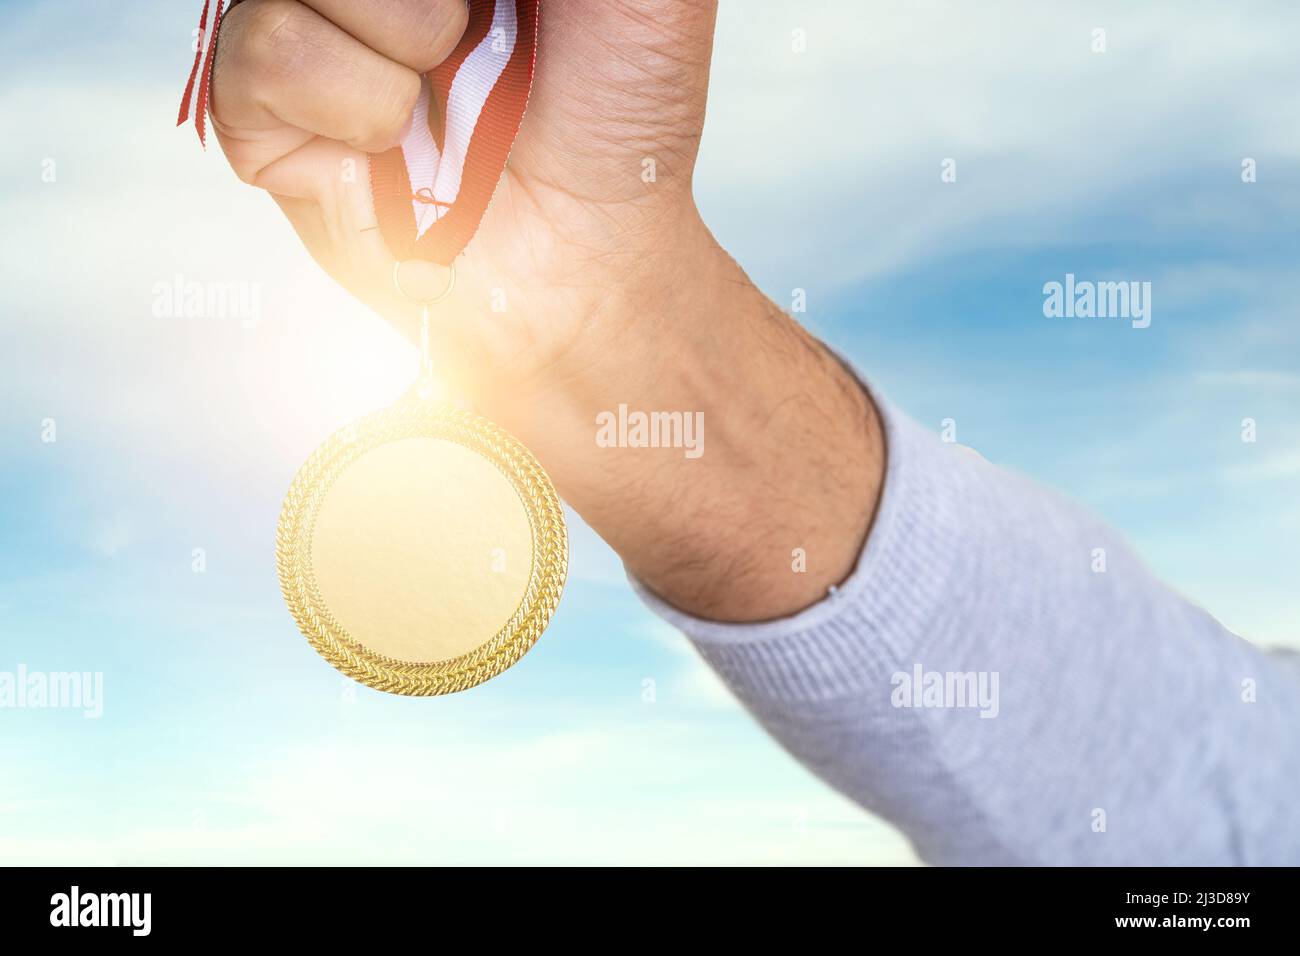 Man raising hand and holding gold medal. Concept of ambition perseverance and victory. Stock Photo